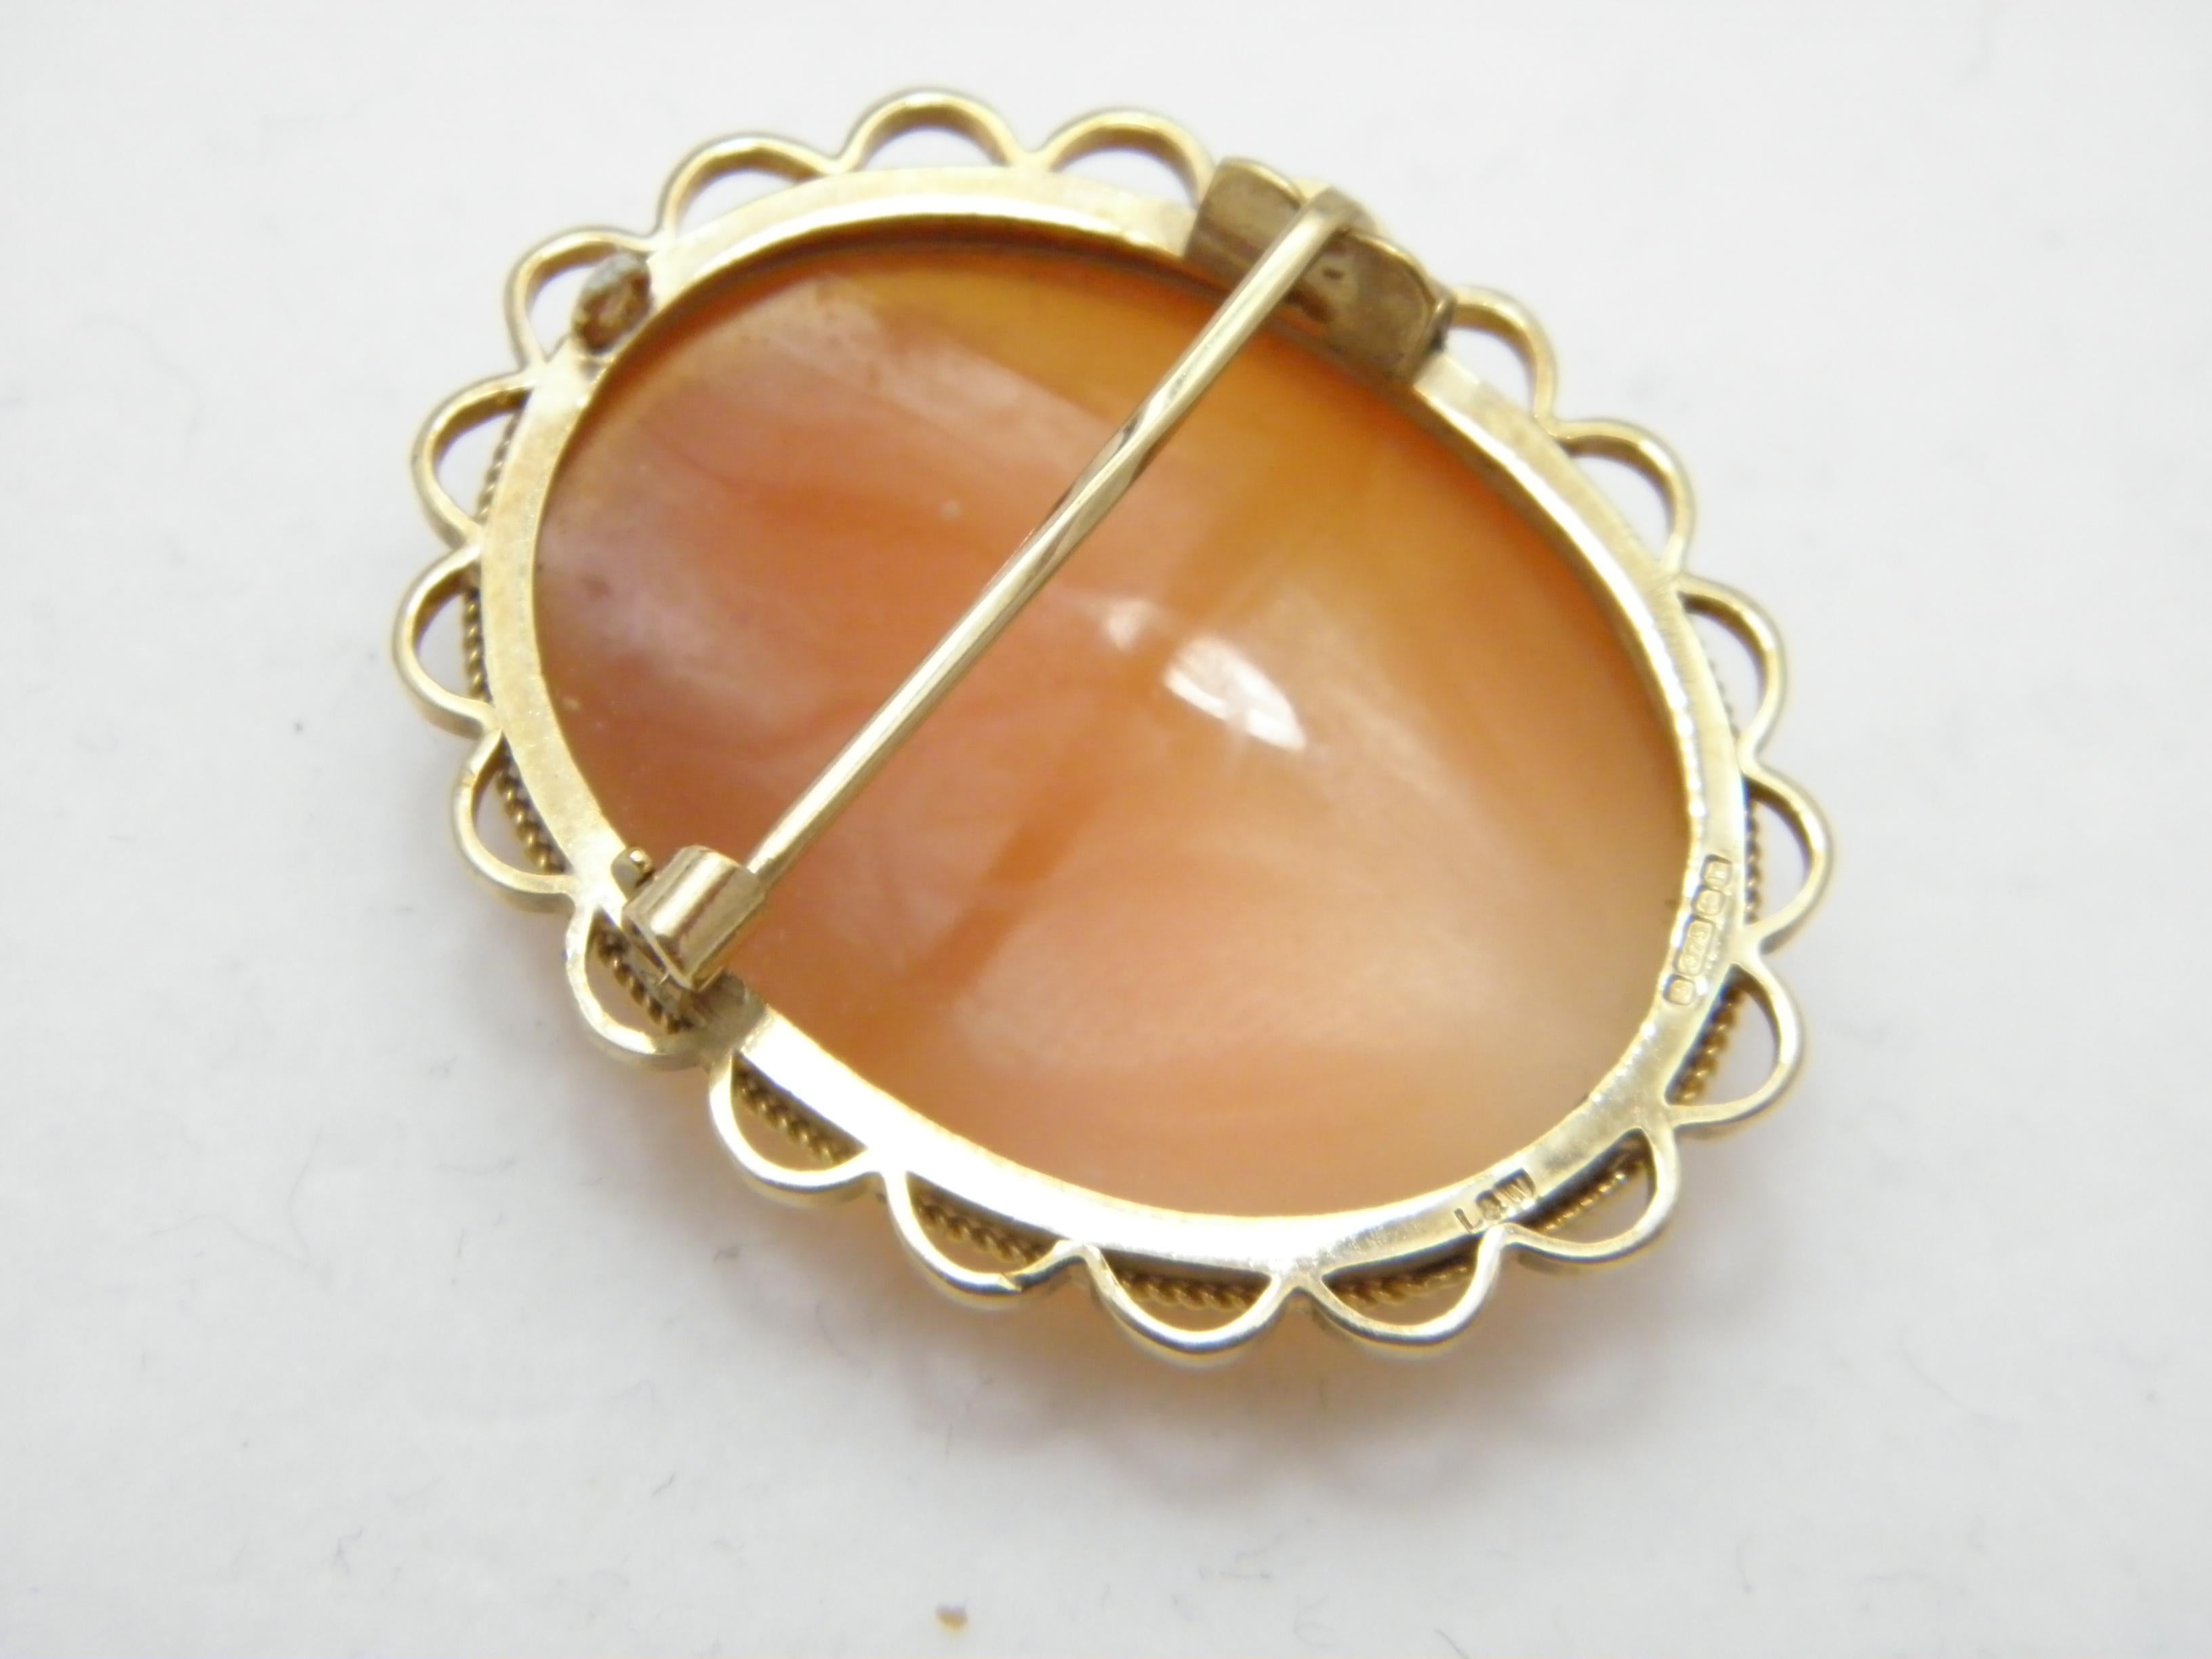 Vintage 9ct Gold Large Shell Cameo Brooch Pin c1946 Heavy 6.6g 375 Purity In Good Condition For Sale In Camelford, GB